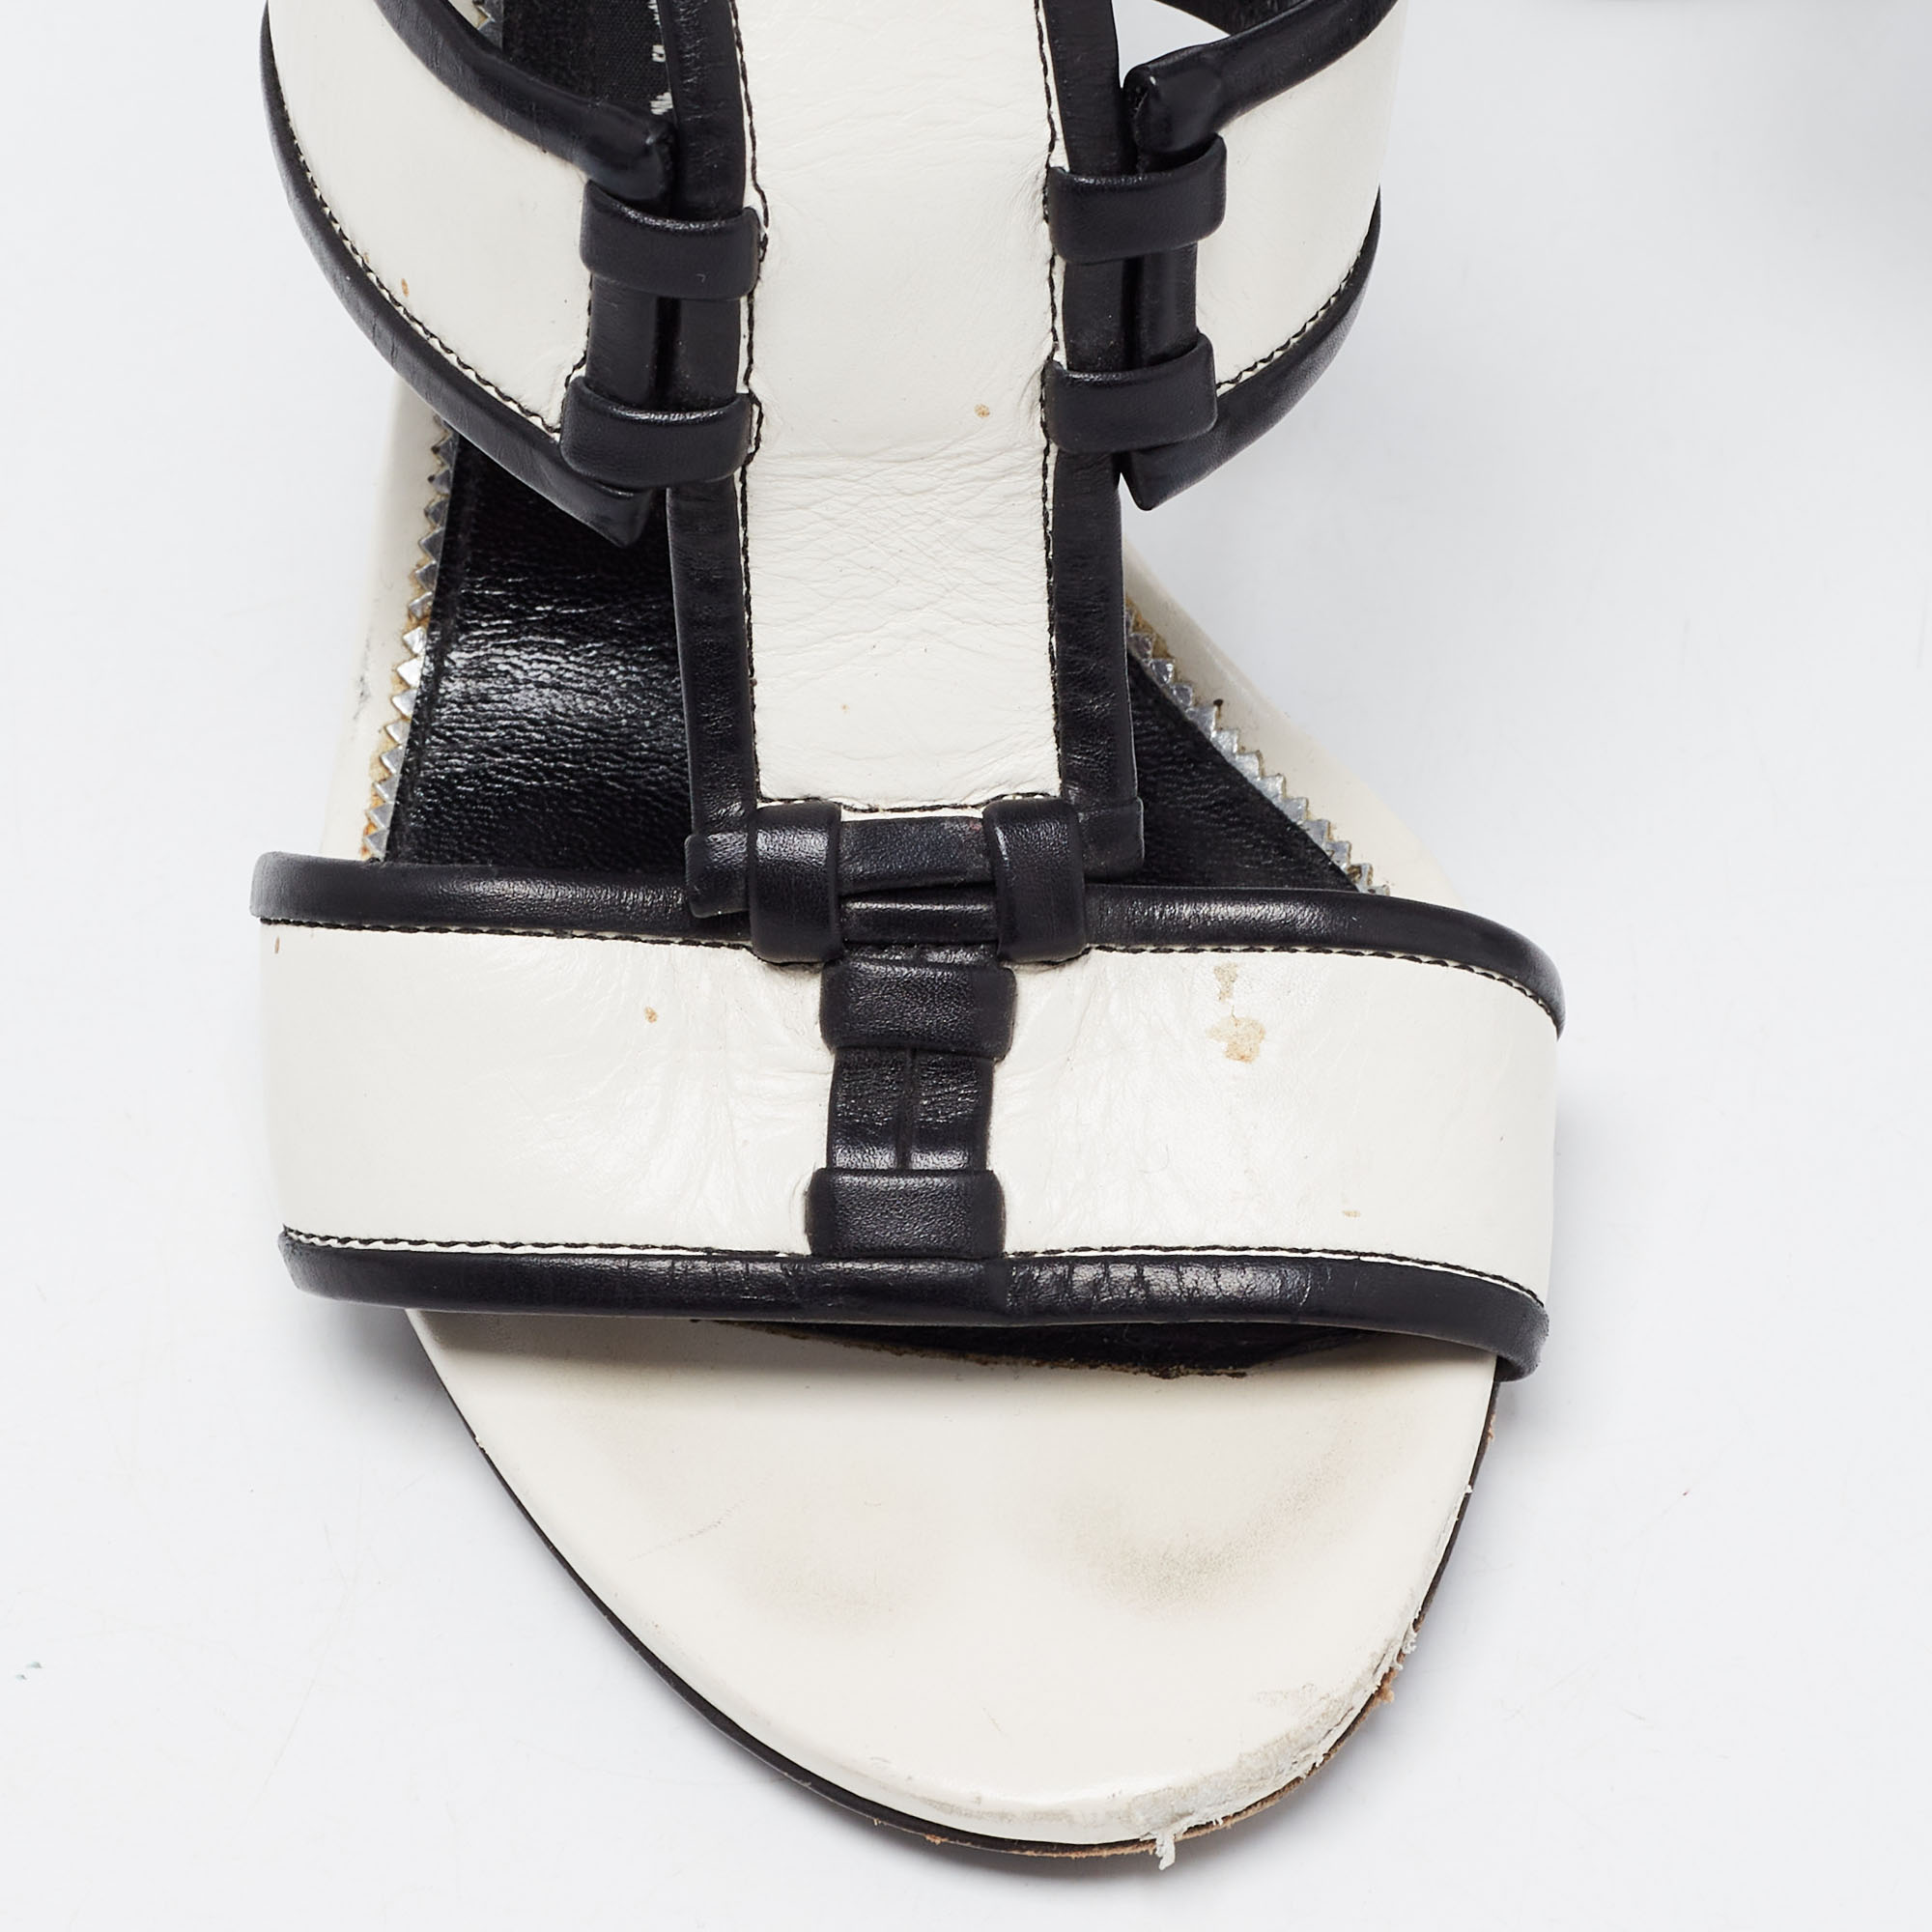 Tom Ford White/Black Paneled Leather Patchwork Ankle Strap Sandals Size 37.5